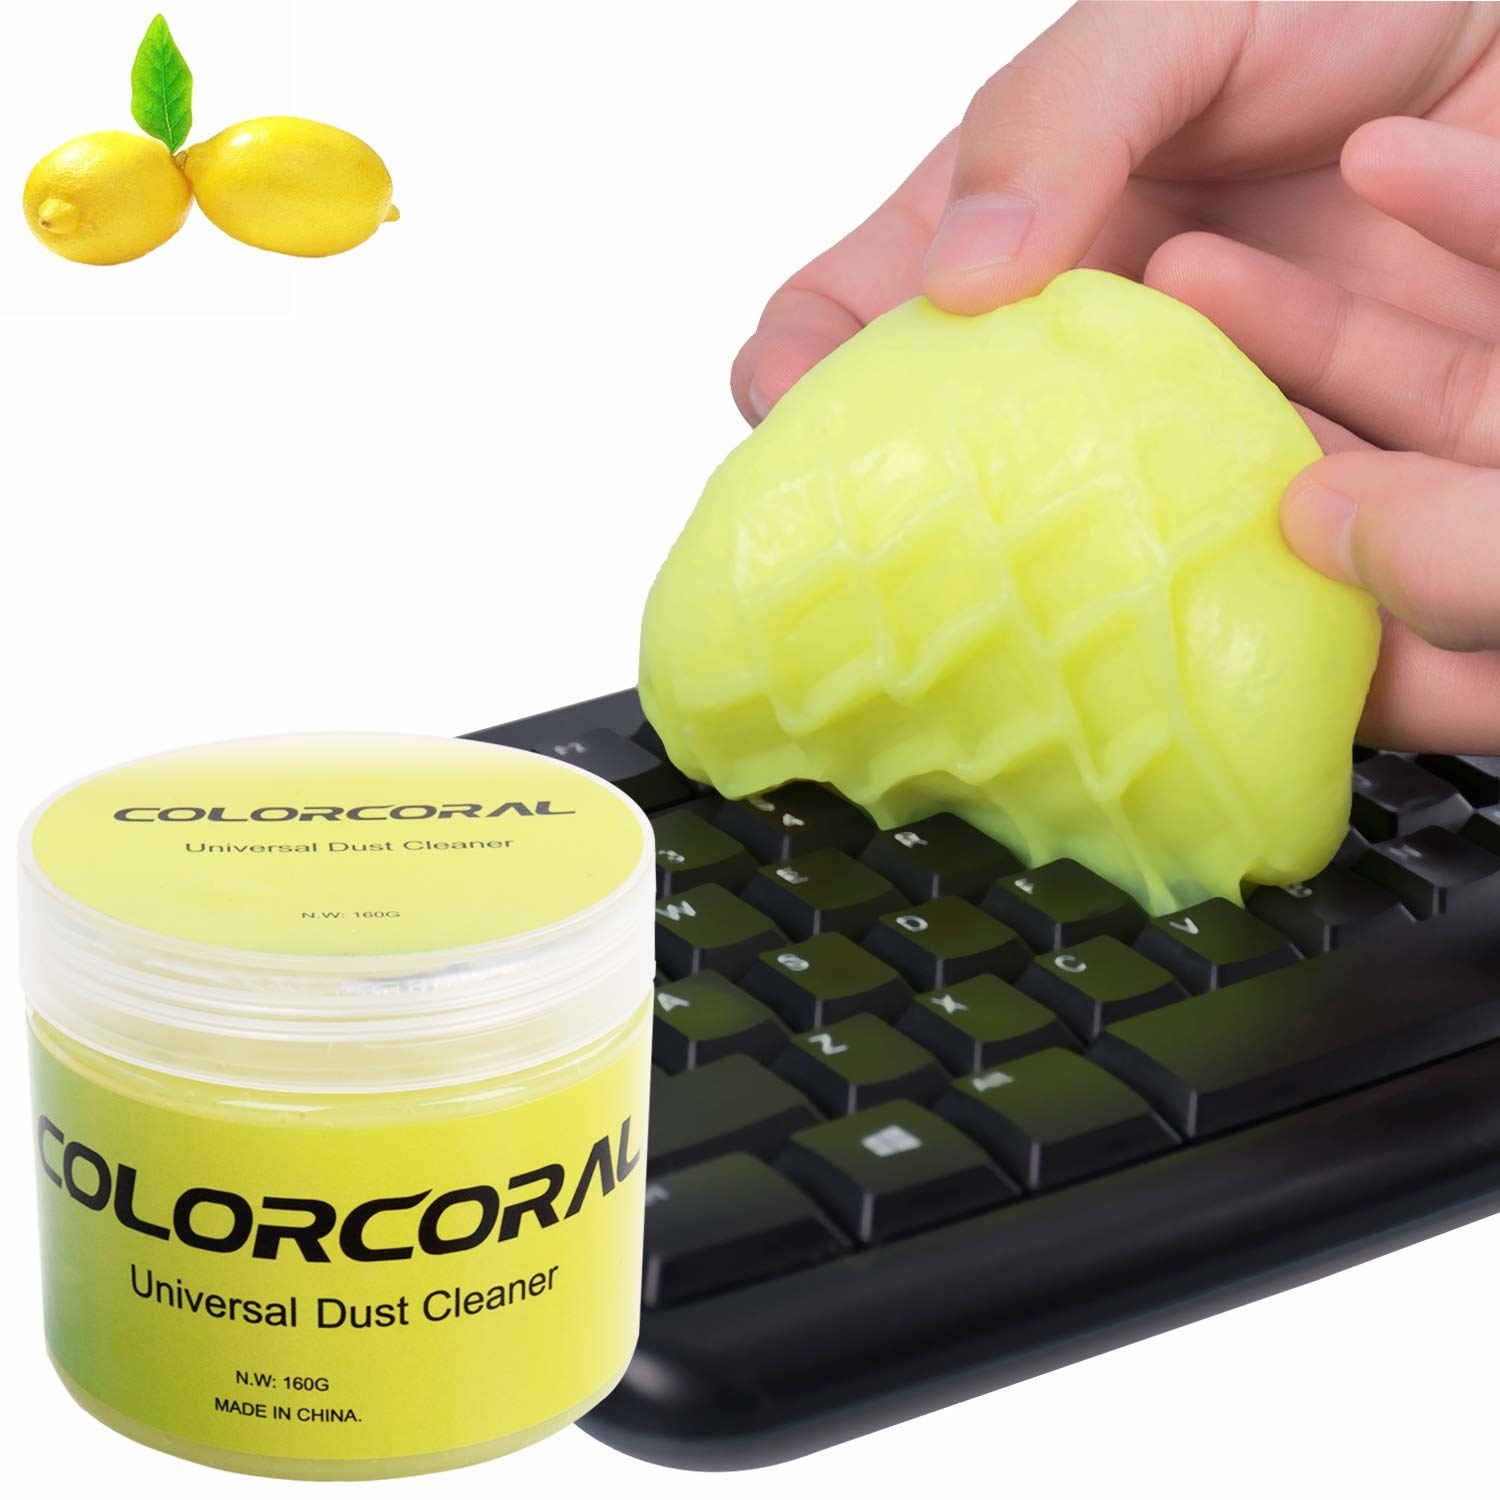 person using the goo to get in between keyboard keys